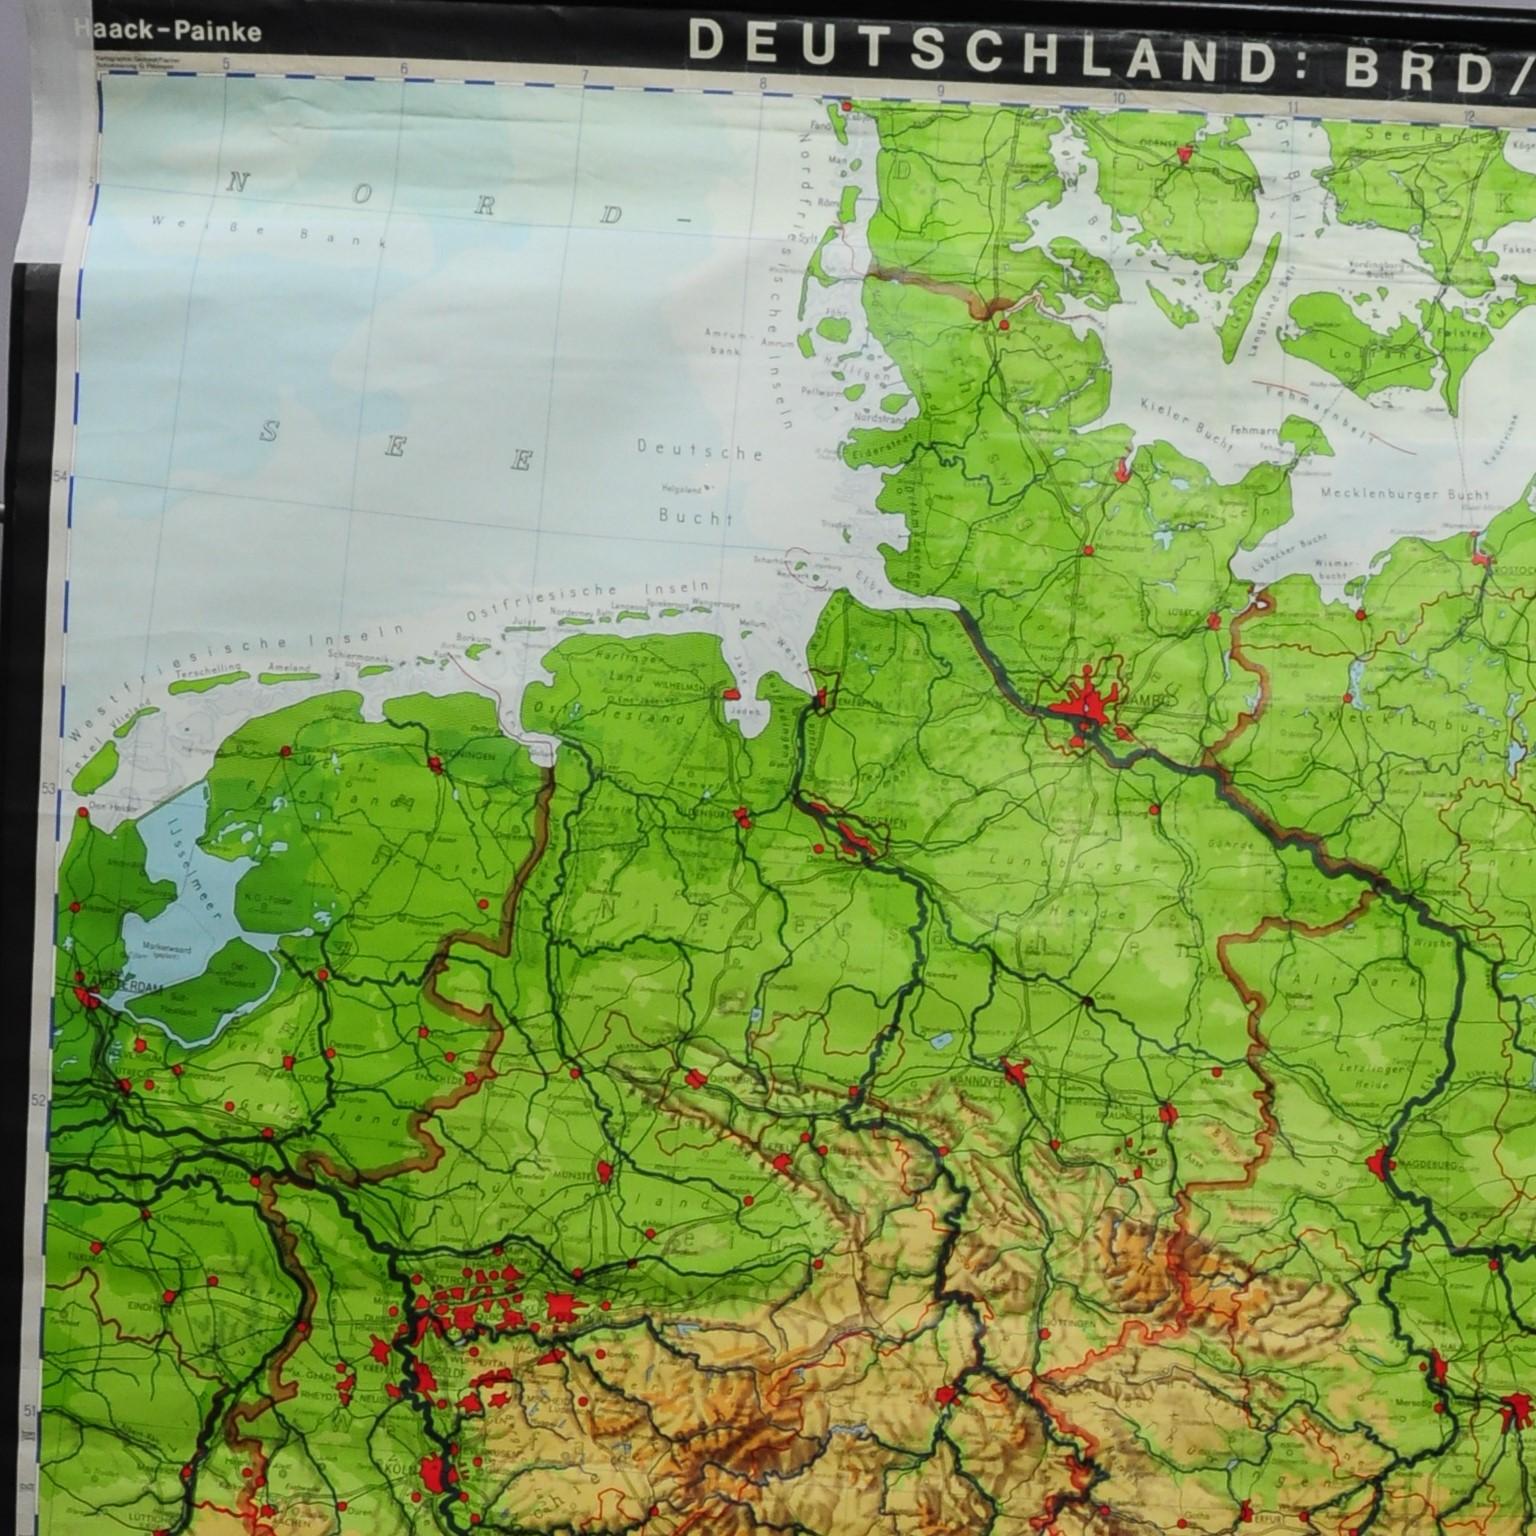 A classical rollable vintage wall chart illustrating a map of Germany (Federal Republic of Germany and German Democratic Republic - while Germany was separated). Published by the Haack-Painke, Justus-Perthes-Darmstadt. Colorful print on paper